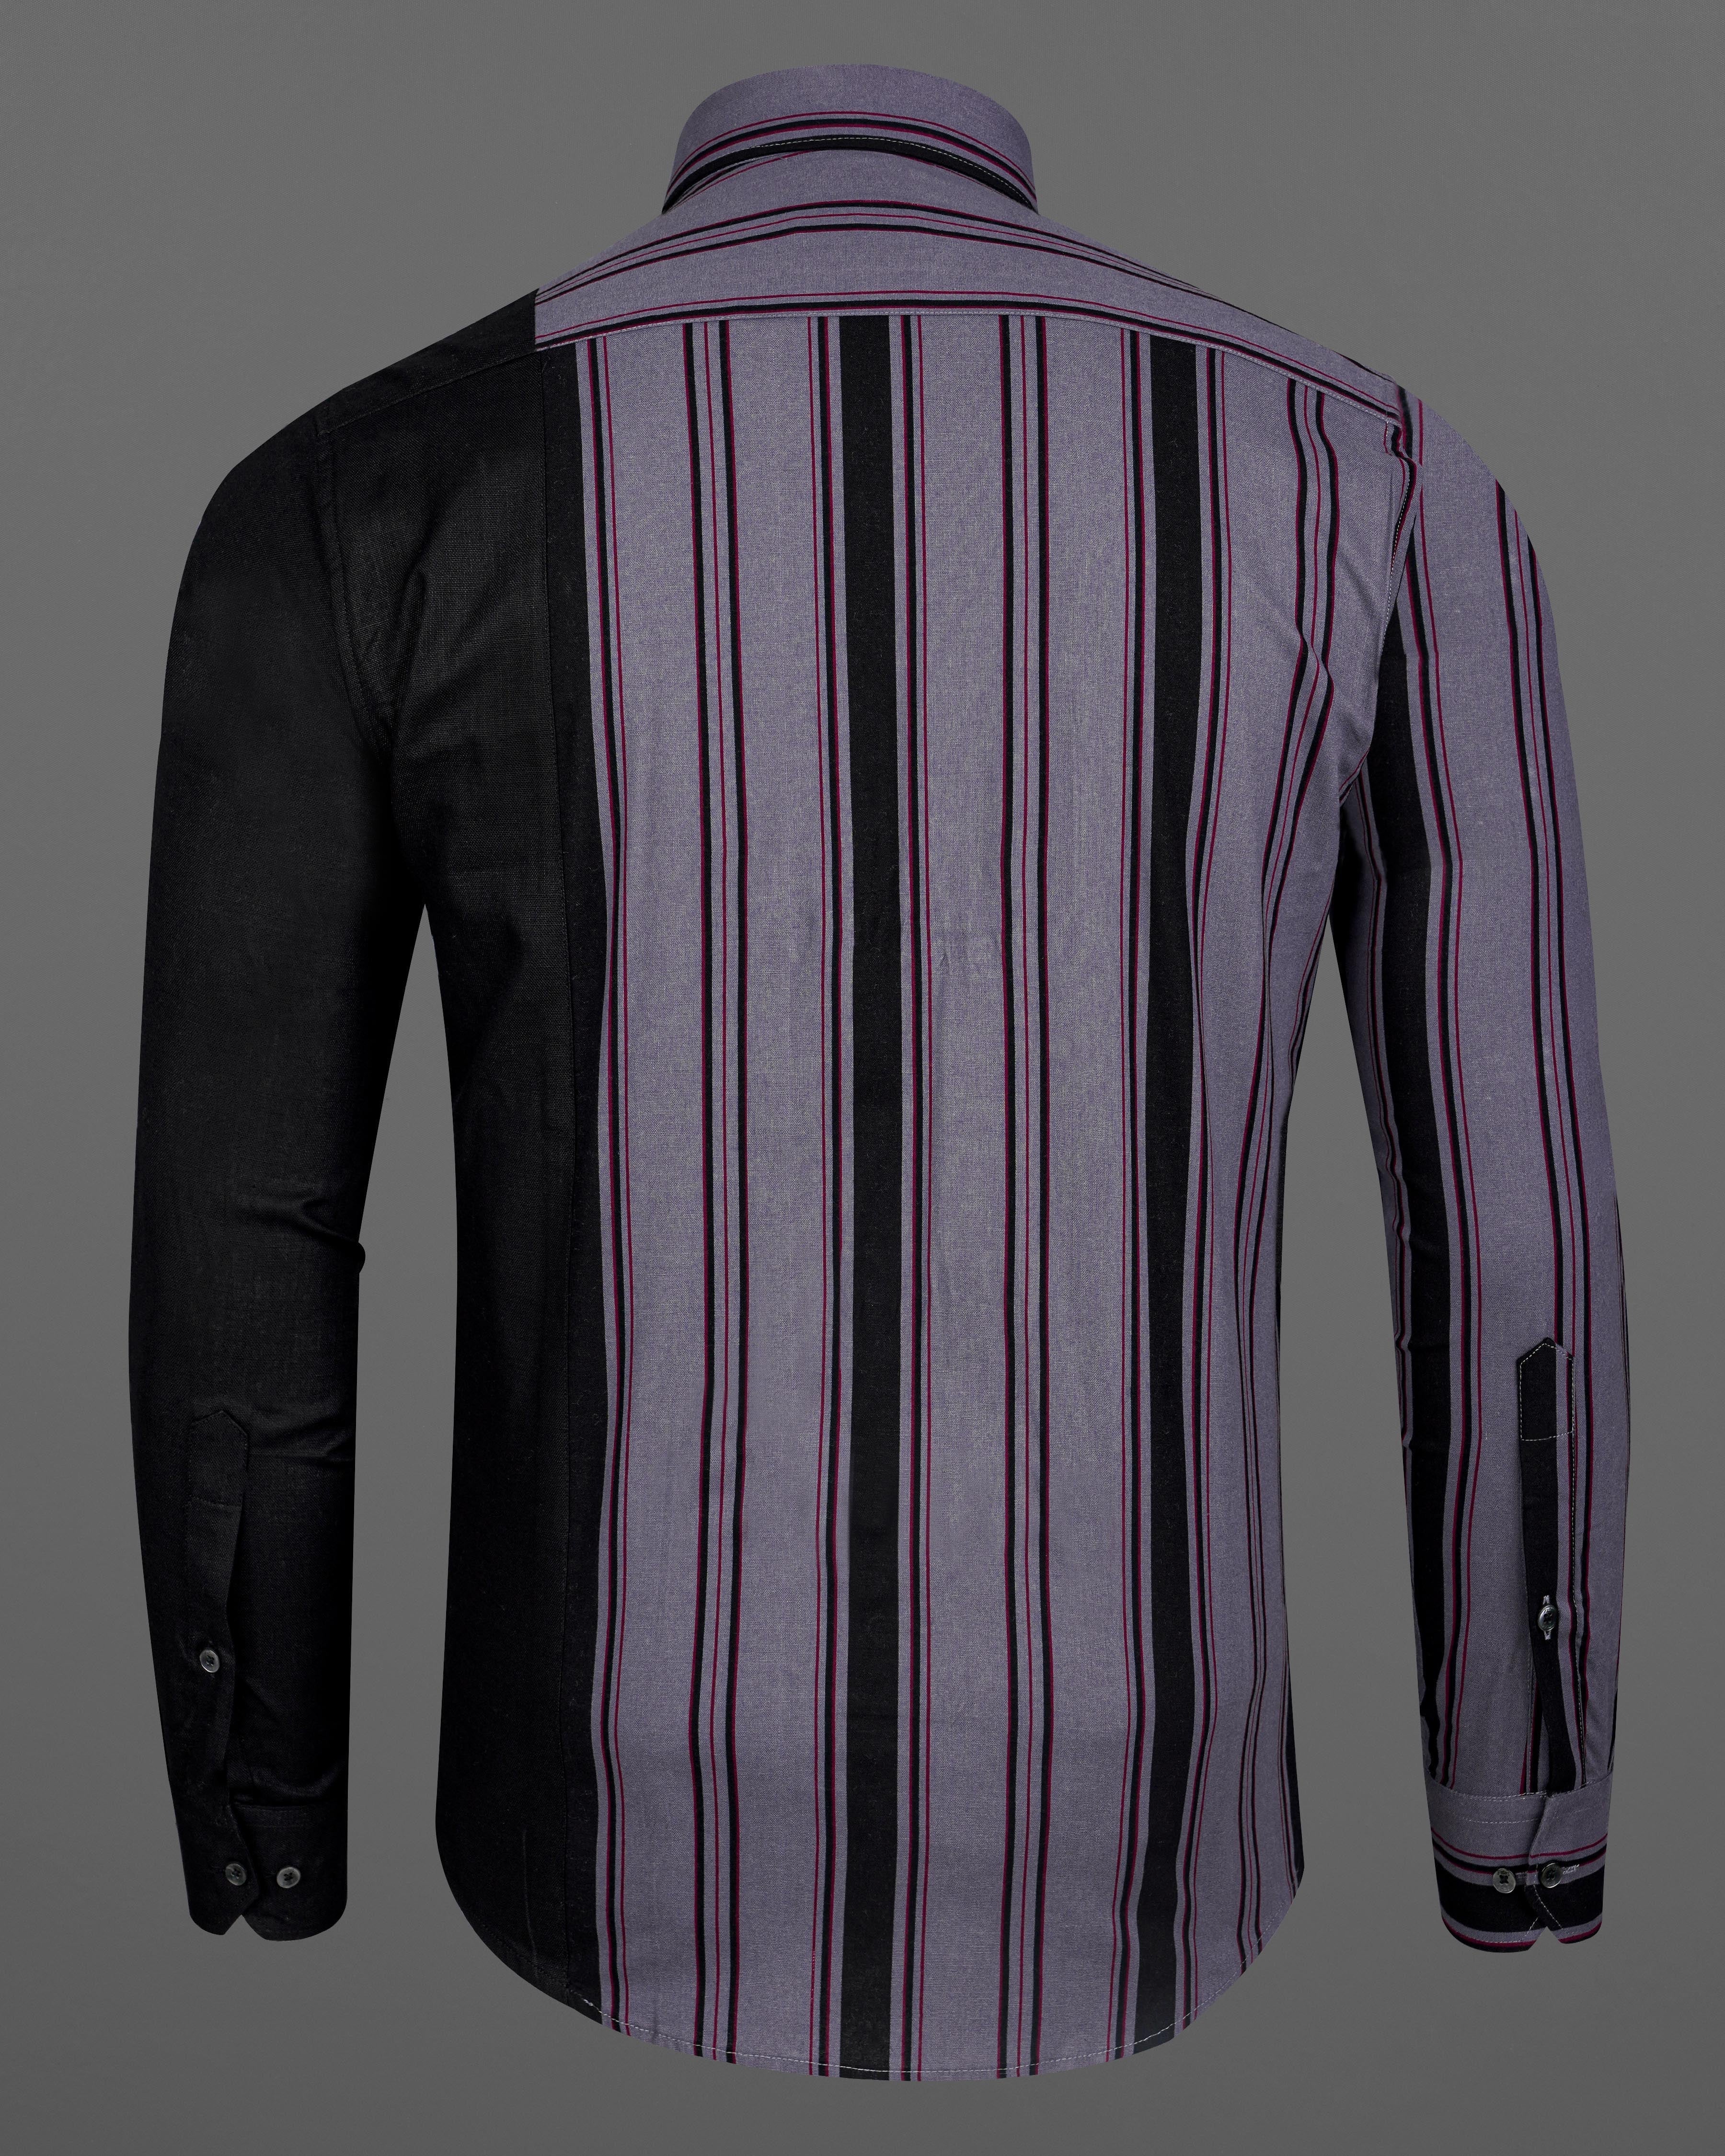 Mobster Gray and Black Striped Royal Oxford Designer Shirt 8331-BLK-P111 -38,8331-BLK-P111 -H-38,8331-BLK-P111 -39,8331-BLK-P111 -H-39,8331-BLK-P111 -40,8331-BLK-P111 -H-40,8331-BLK-P111 -42,8331-BLK-P111 -H-42,8331-BLK-P111 -44,8331-BLK-P111 -H-44,8331-BLK-P111 -46,8331-BLK-P111 -H-46,8331-BLK-P111 -48,8331-BLK-P111 -H-48,8331-BLK-P111 -50,8331-BLK-P111 -H-50,8331-BLK-P111 -52,8331-BLK-P111 -H-52